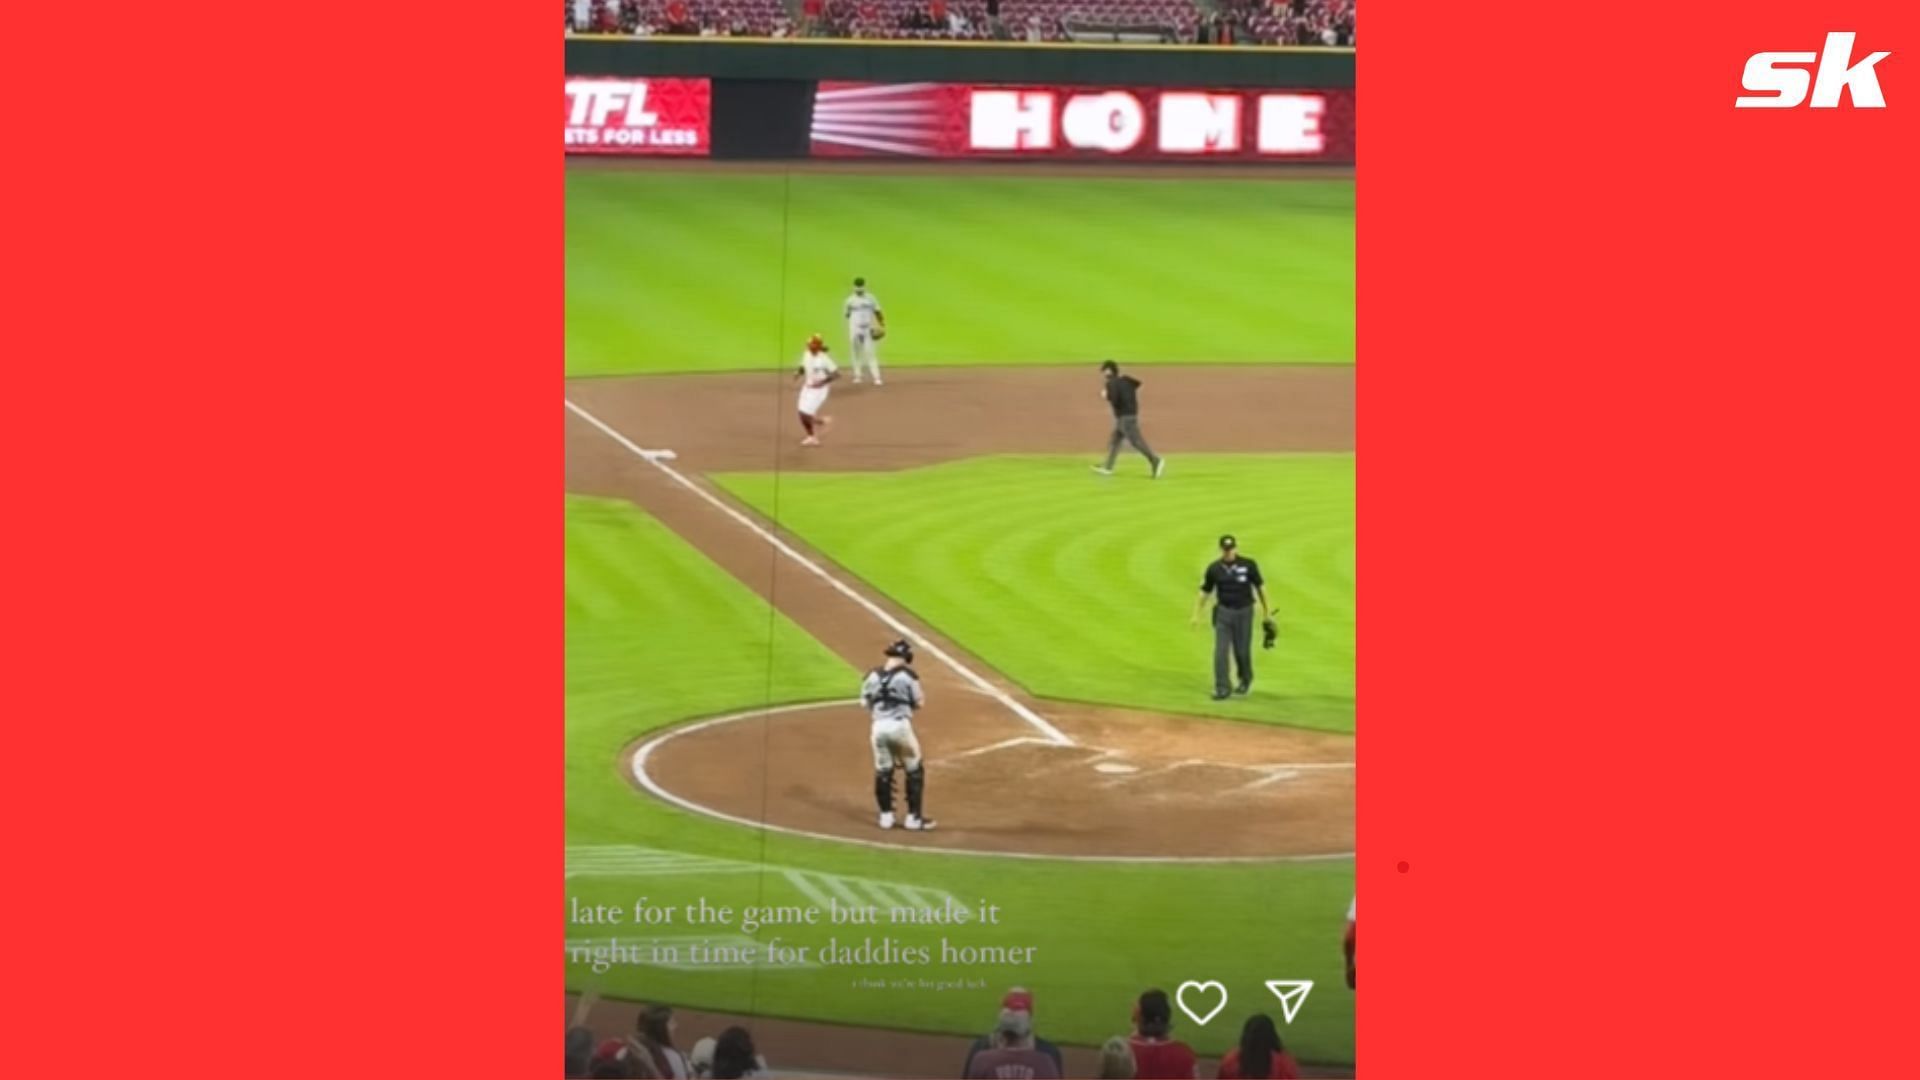 Jonathan India&#039;s wife celebrated his home run via and Instagram story